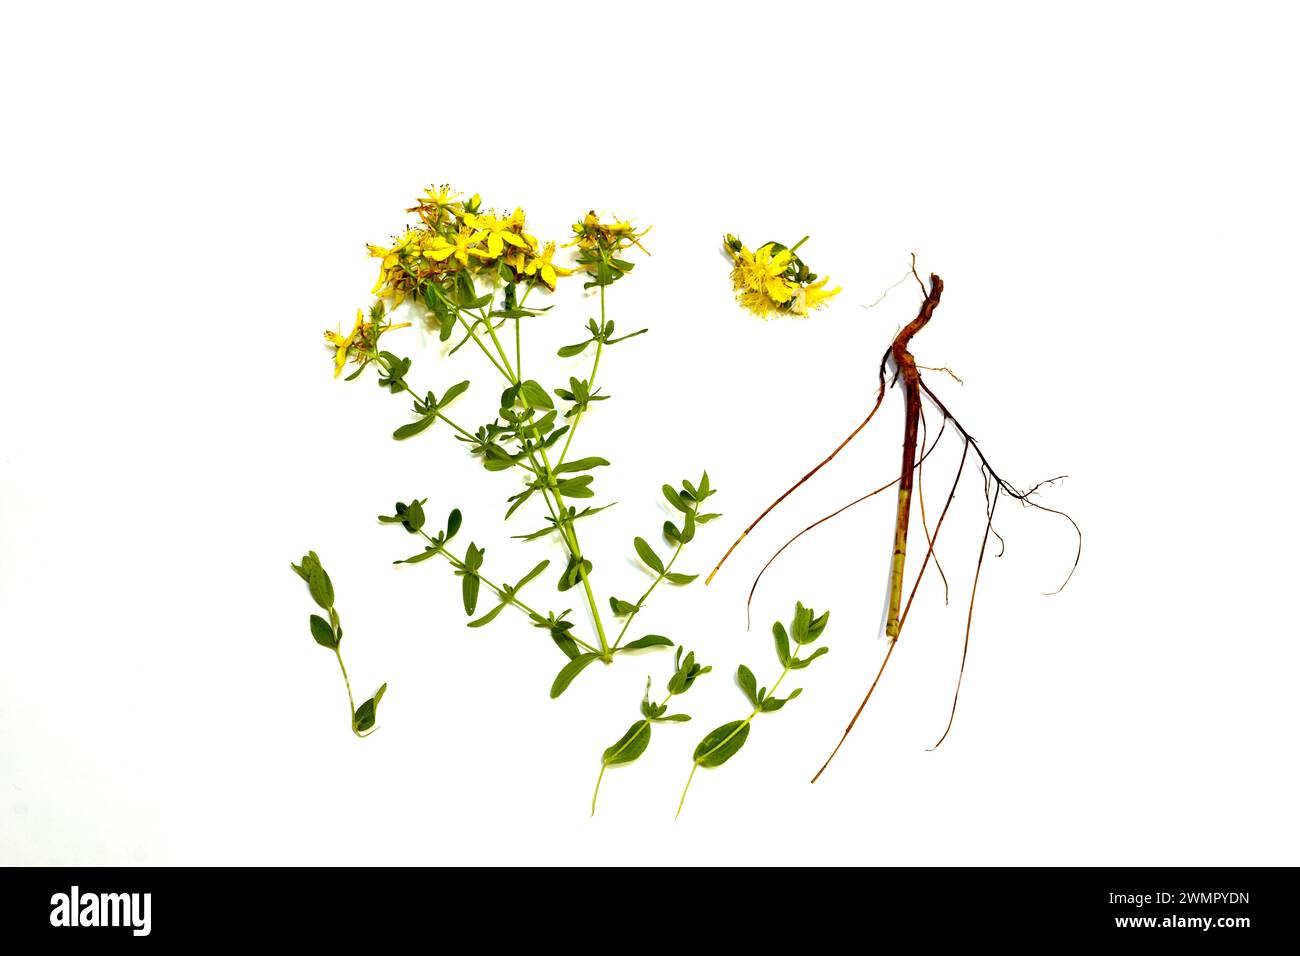 The picture shows the herb St. John's wort with yellow flowers, its root system, leaves and five-petal flowers separately. Stock Photo